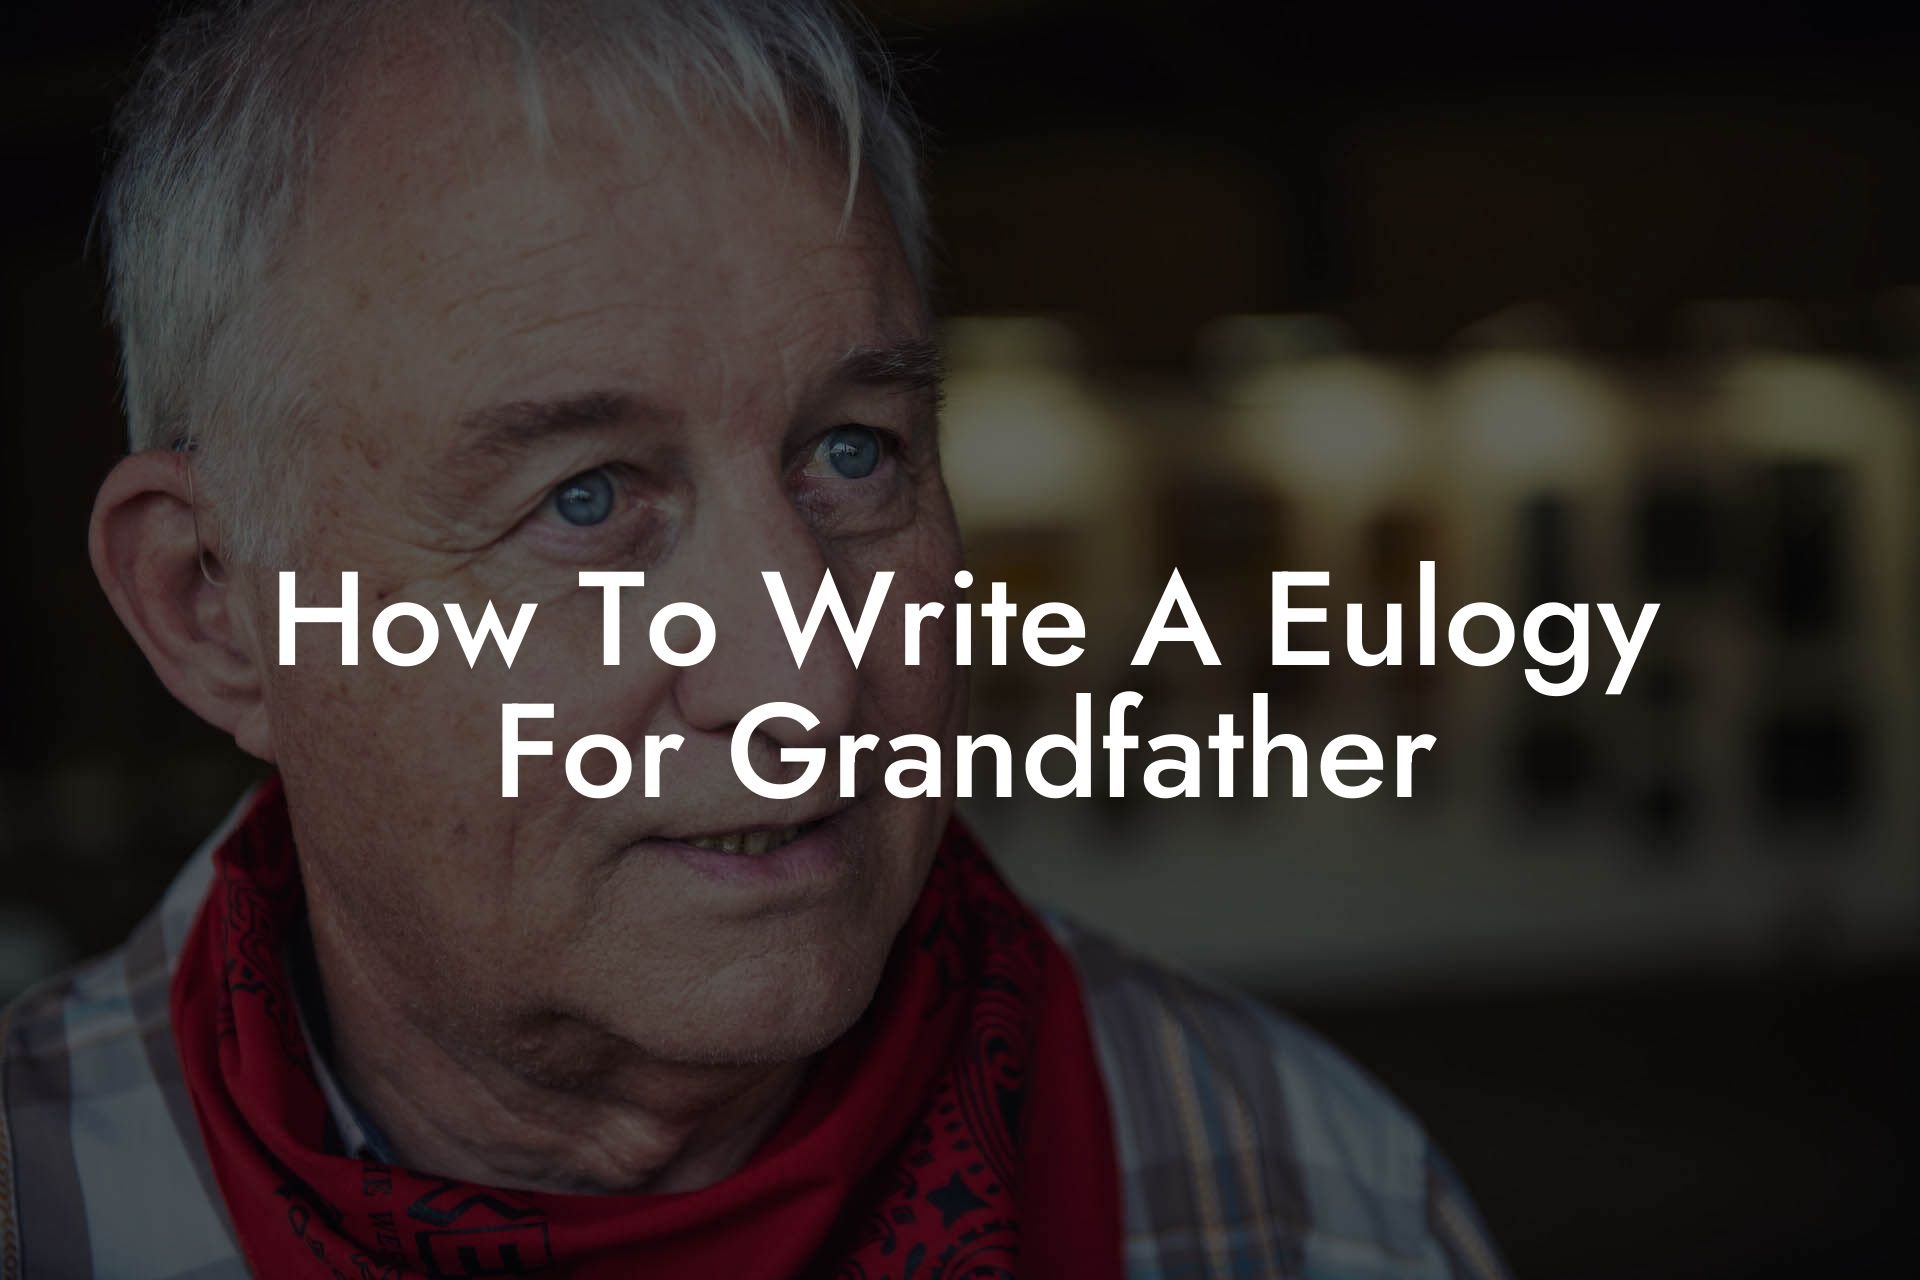 How To Write A Eulogy For Grandfather